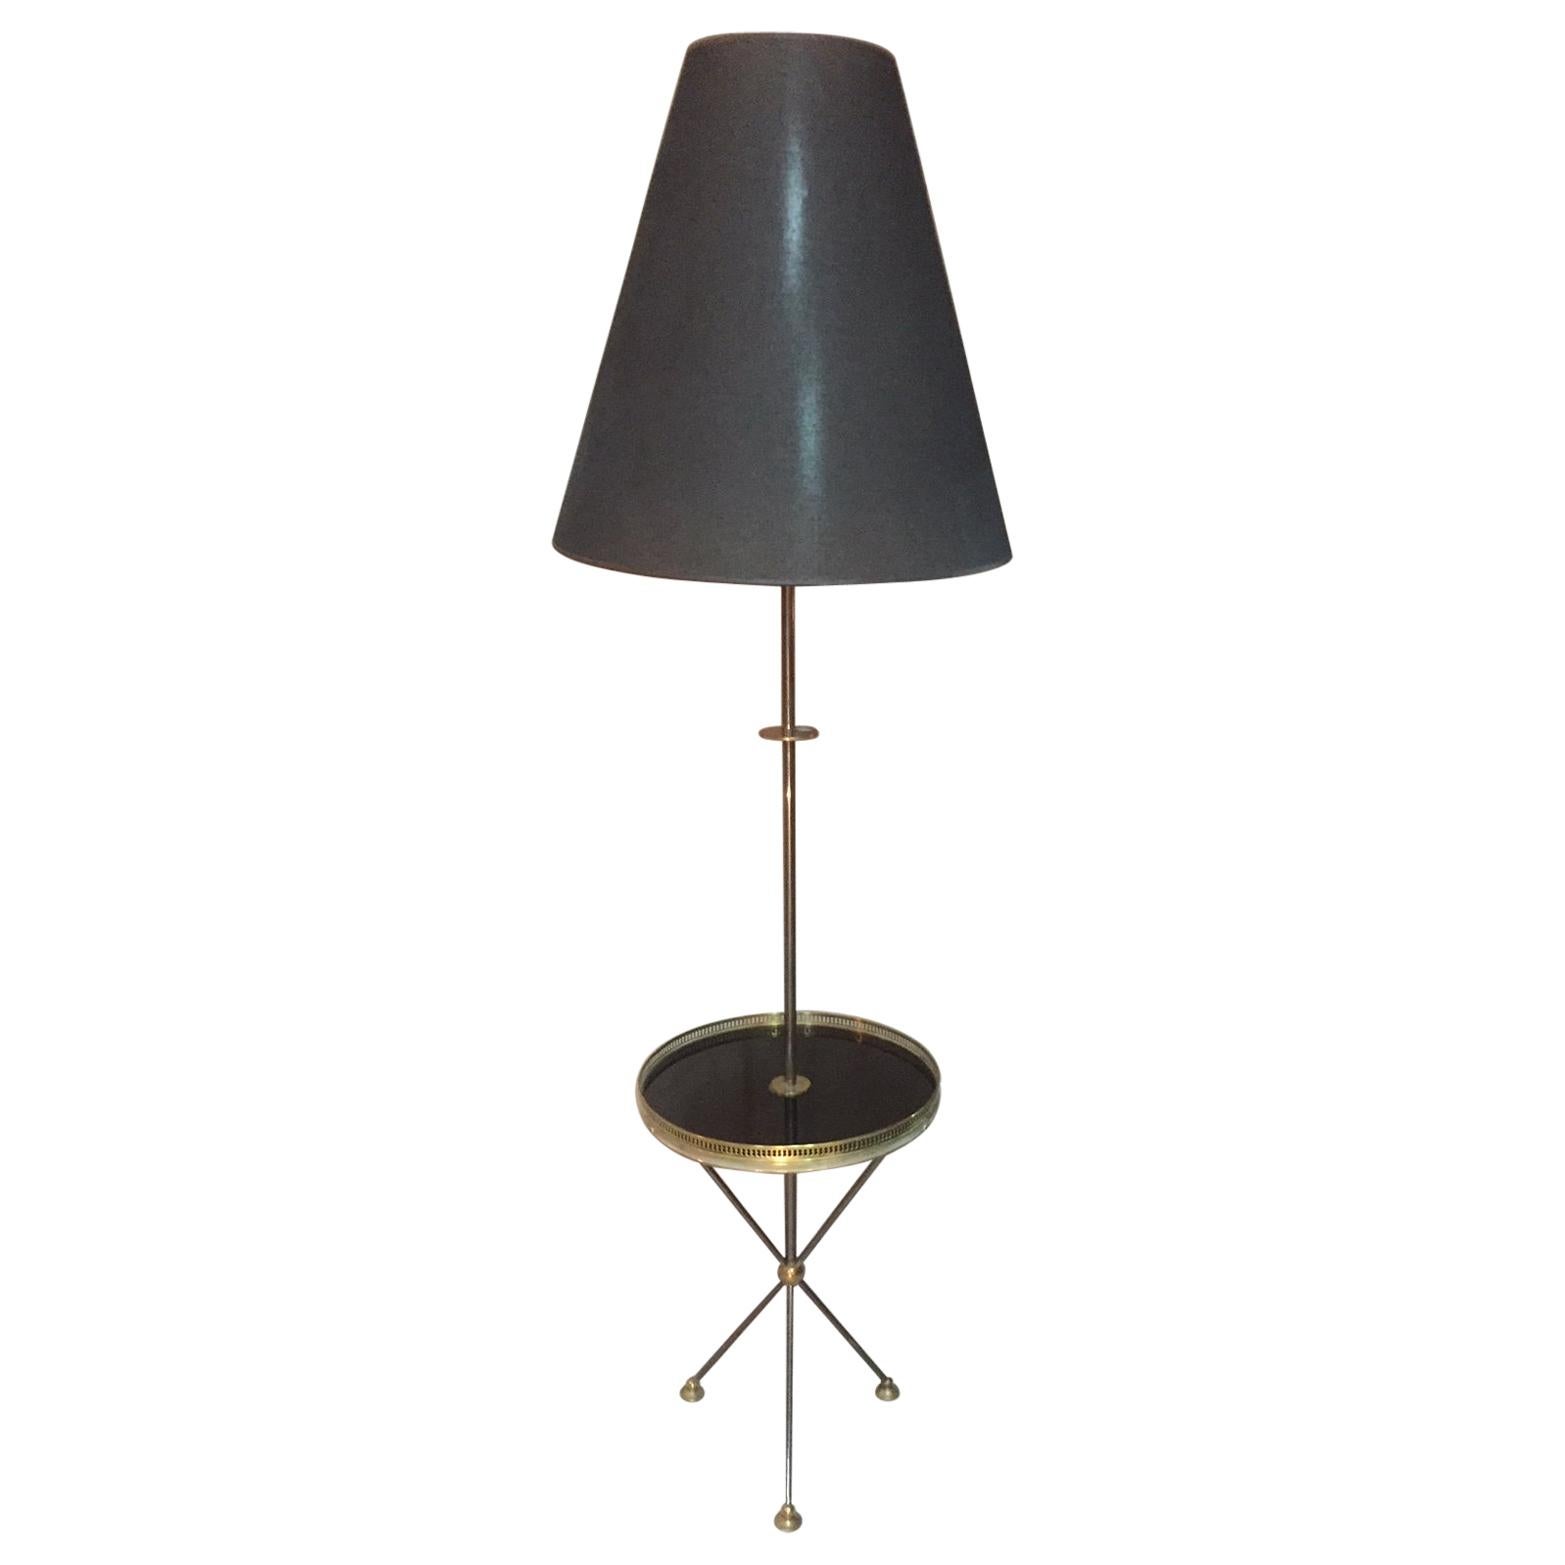 20th Century, French Gilded Brass Floor Lamp, 1950s